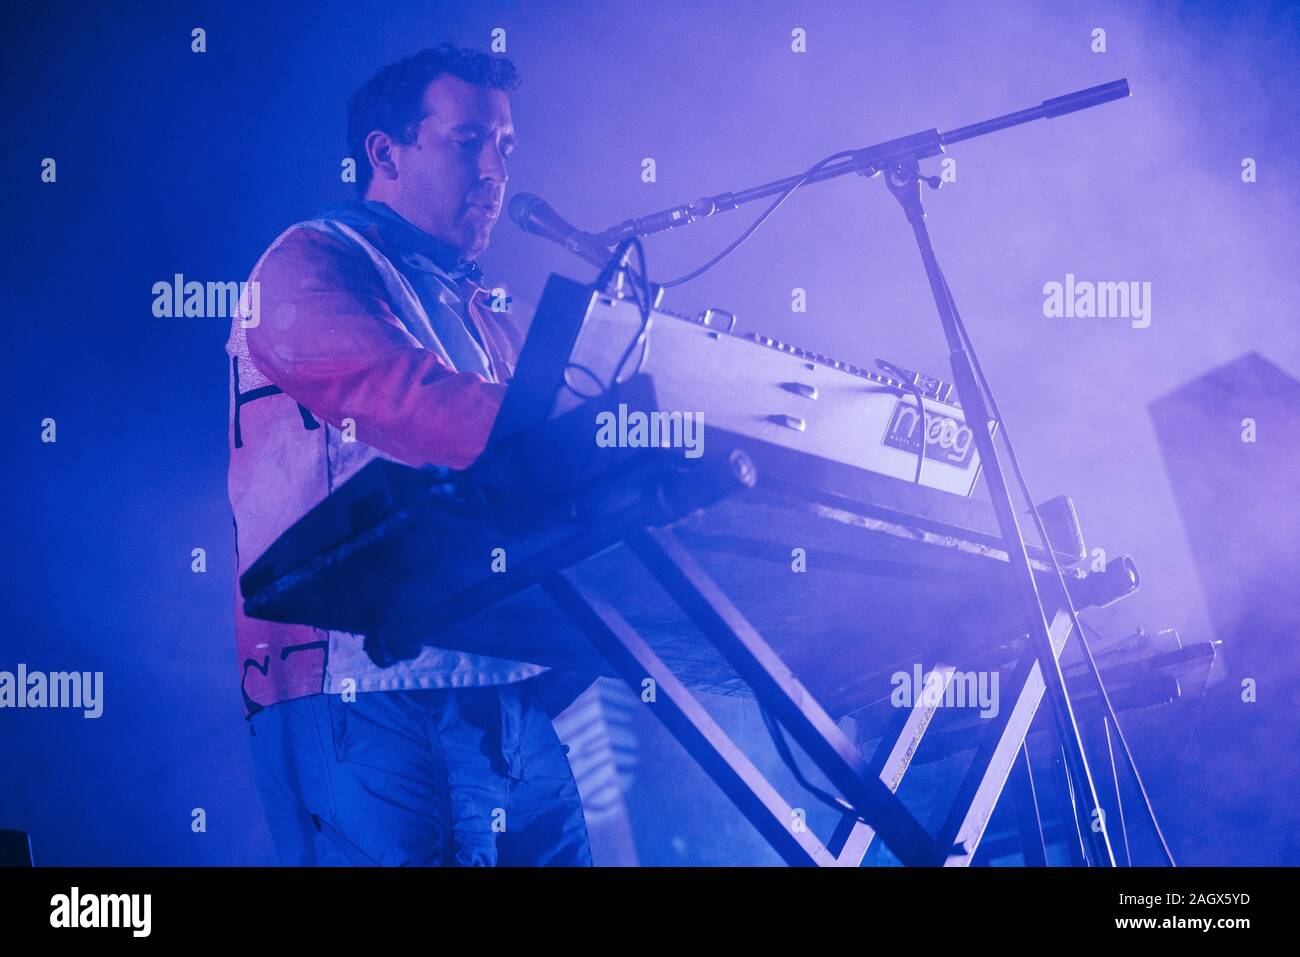 Kvaerndrup, Denmark. 01st, June 2019. The British electronic music band Hot Chip performs a live concert during the Danish music festival Heartland Festival 2019. Here musician Joe Goddard is seen live on stage. (Photo credit: Gonzales Photo - Mathias Kristensen). Stock Photo